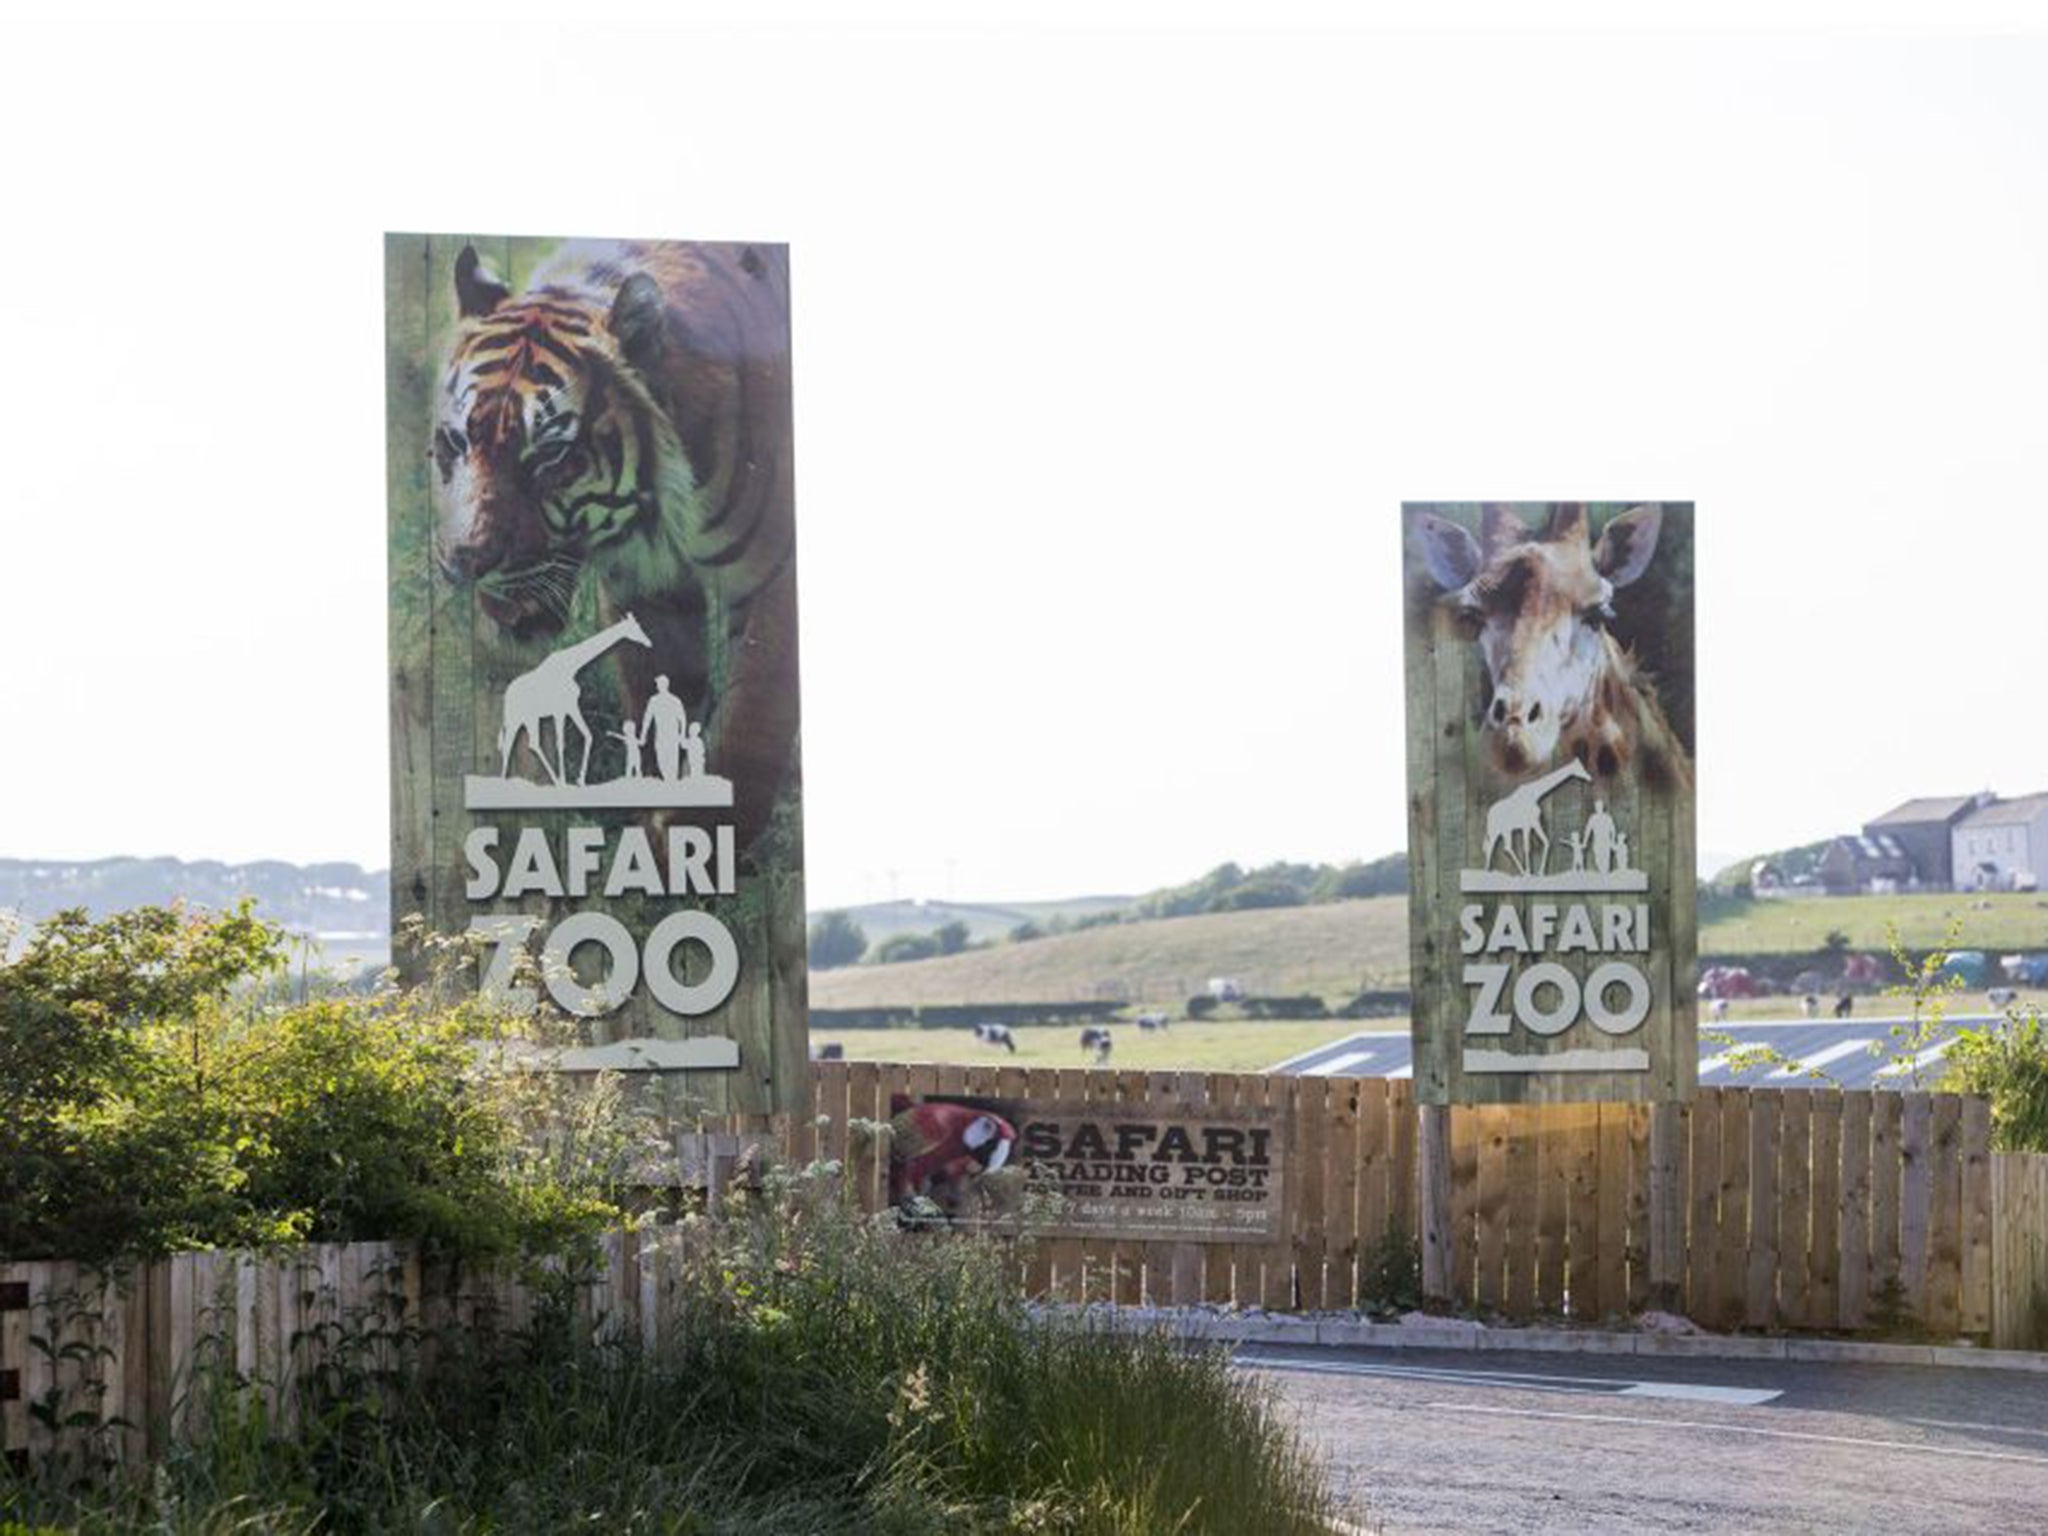 South Lakes Safari Zoo has been allowed to remain open during the appeals process